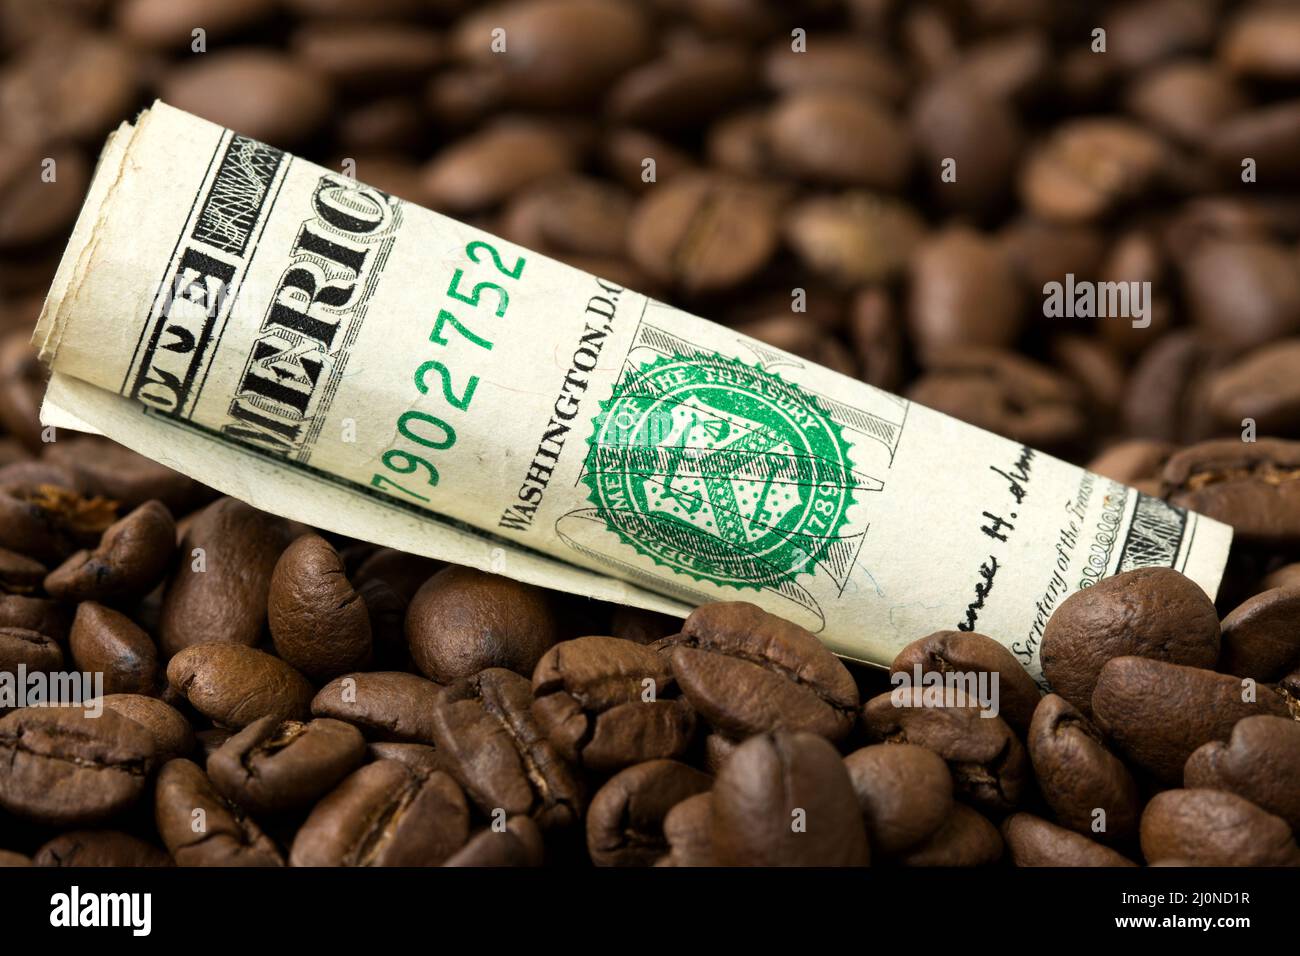 Roasted coffee beans and USD currency close-up Stock Photo